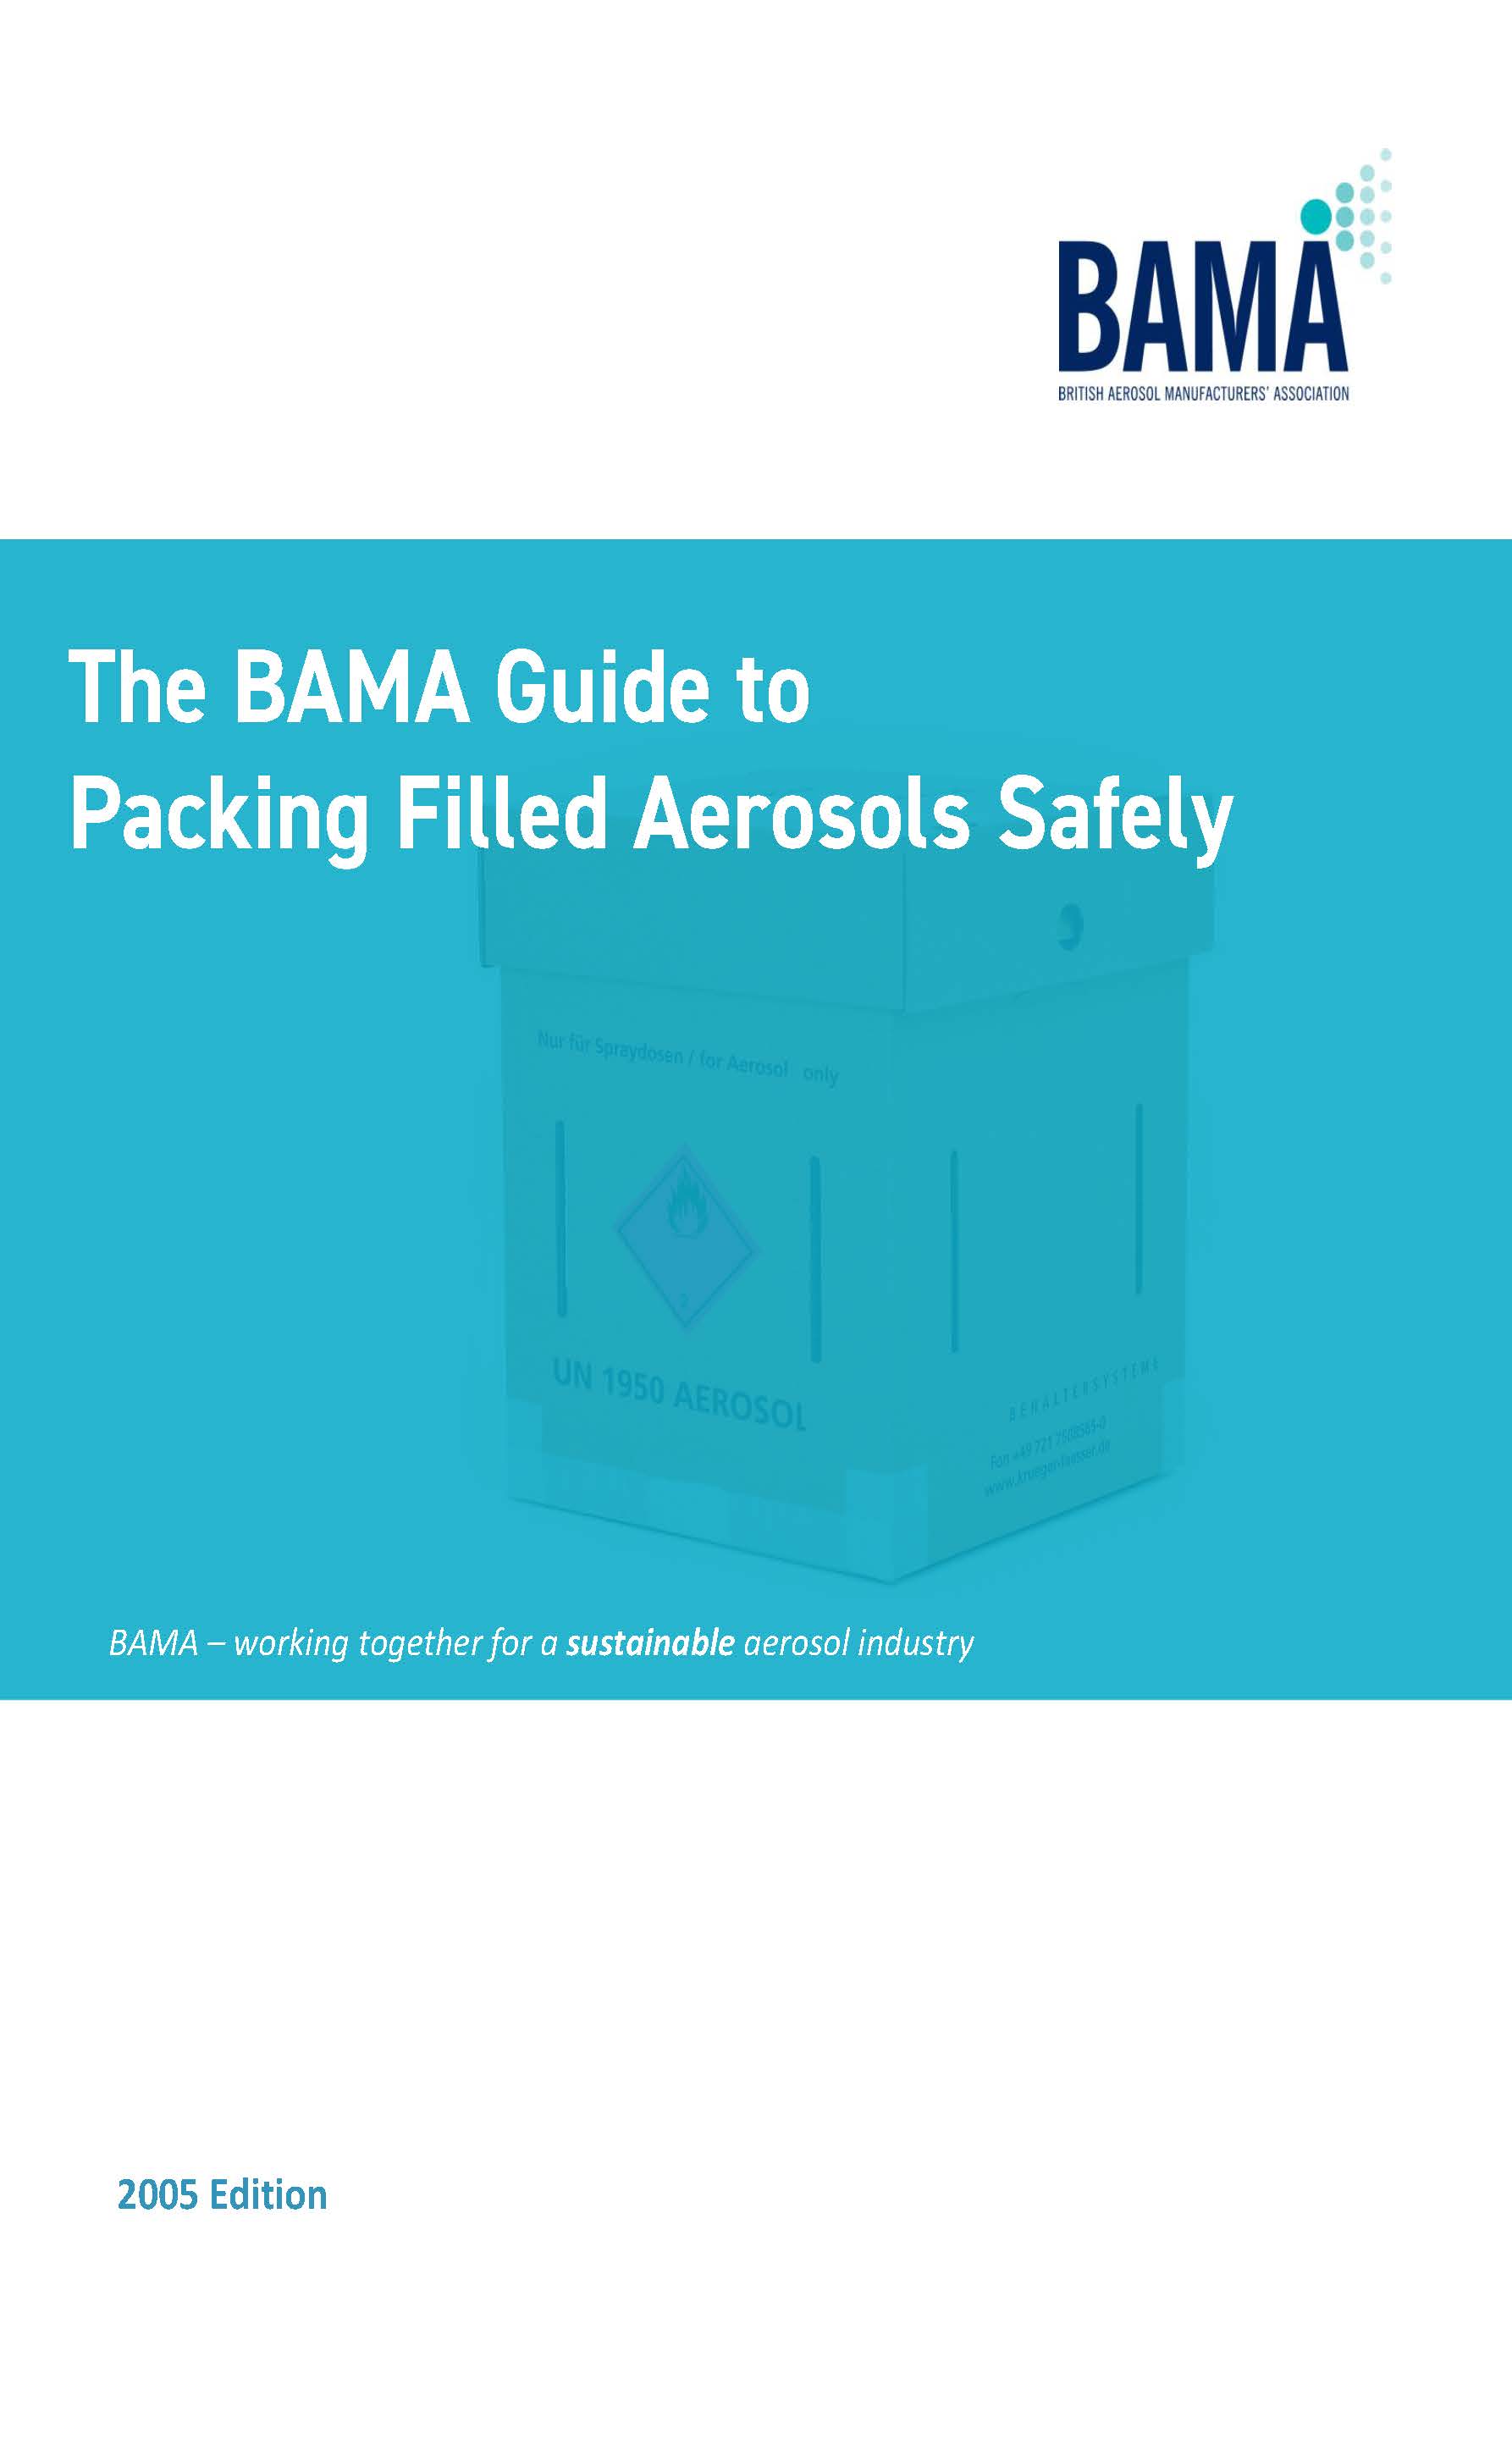 Guide to Packing Filled Aerosols Safely